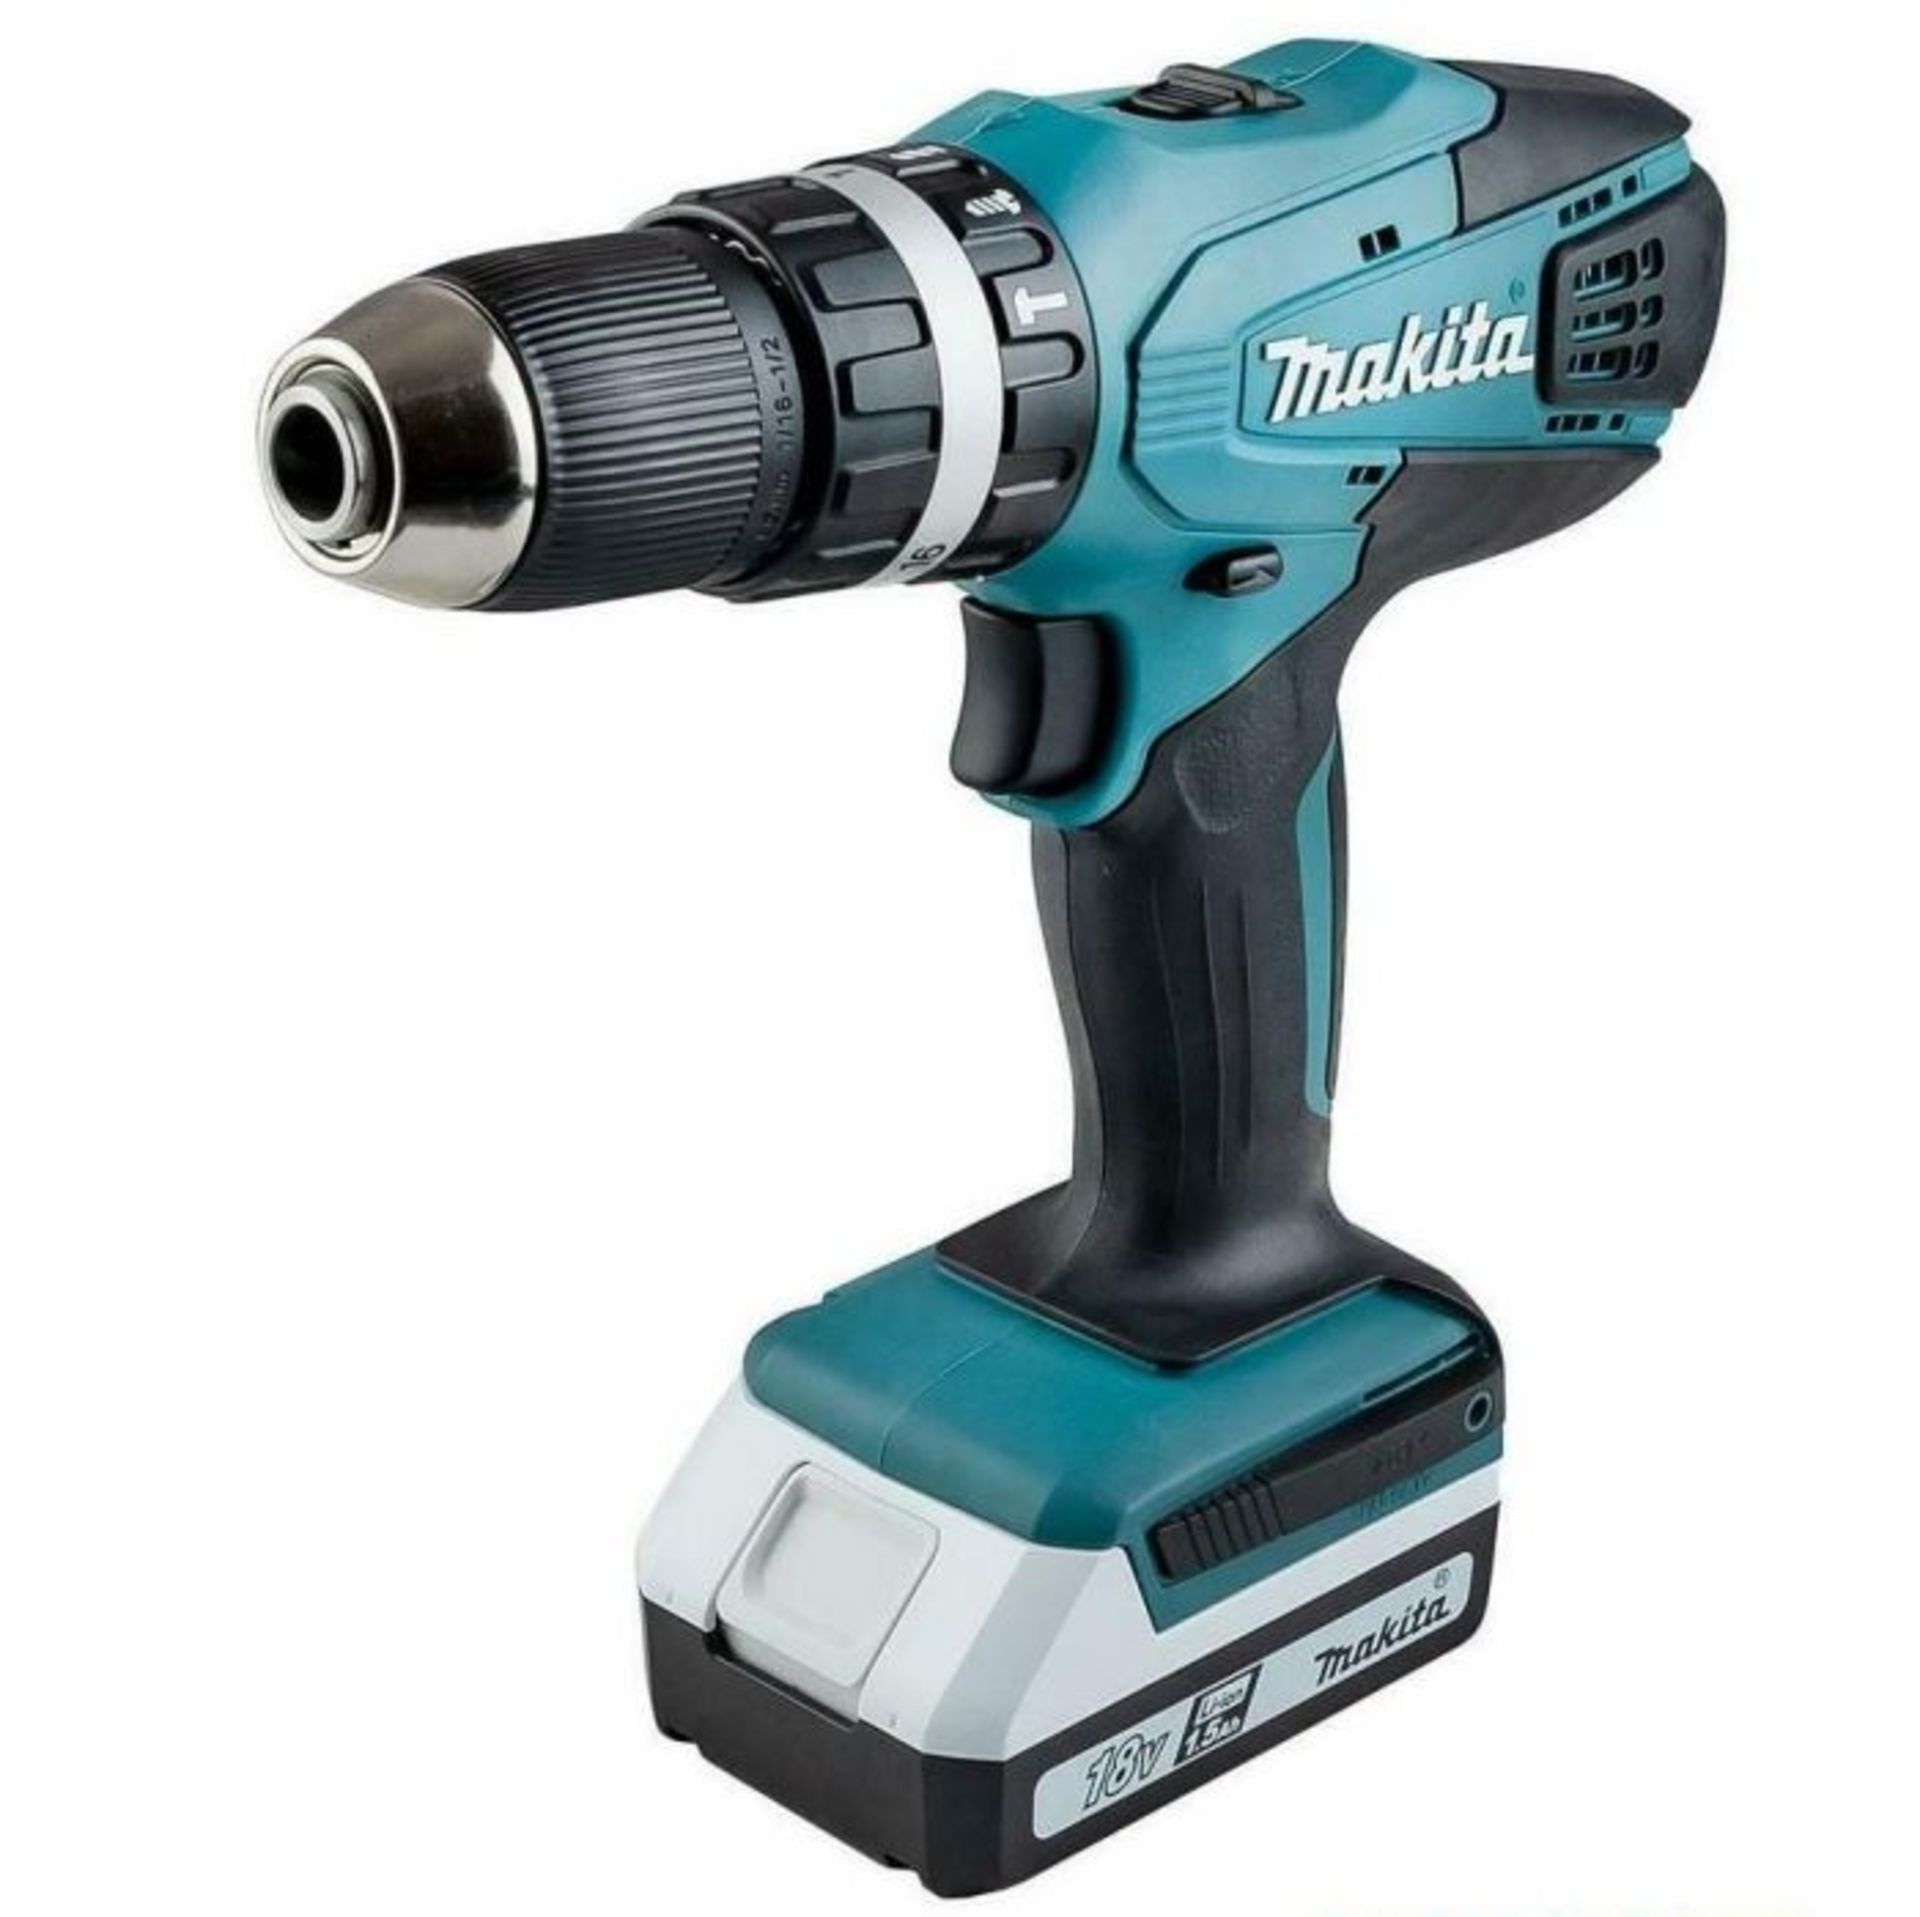 V Brand New Makita 18v Cordless Hammer Drill With Battery And Charger And Case - Image 2 of 2